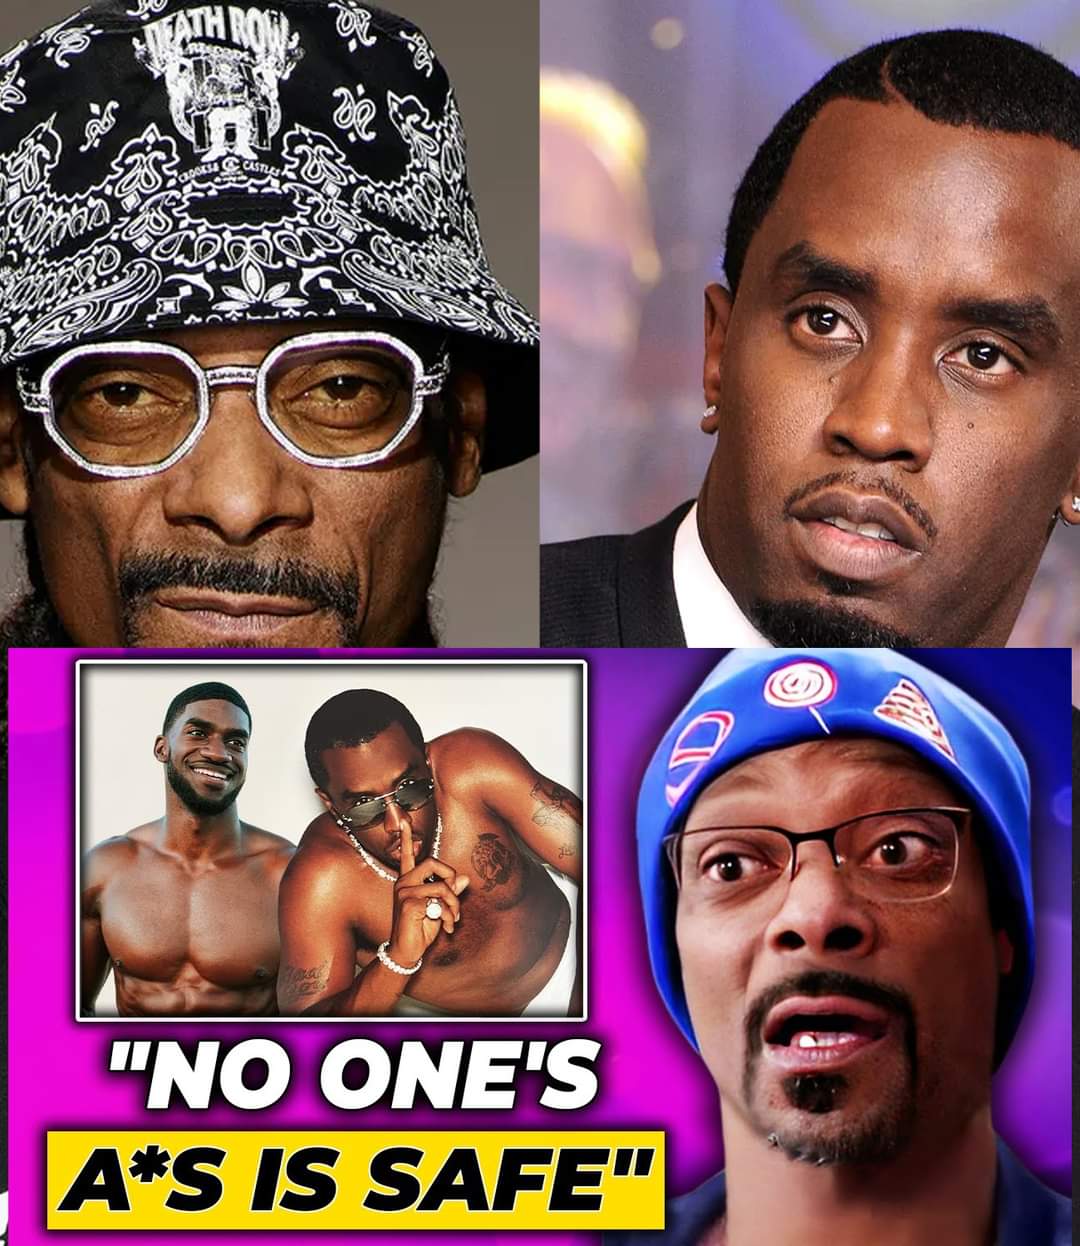 (VIDEO) Snoop Dogg EXPOSES Diddy’s DRUNK G*Y GAMES With Men At The Parties